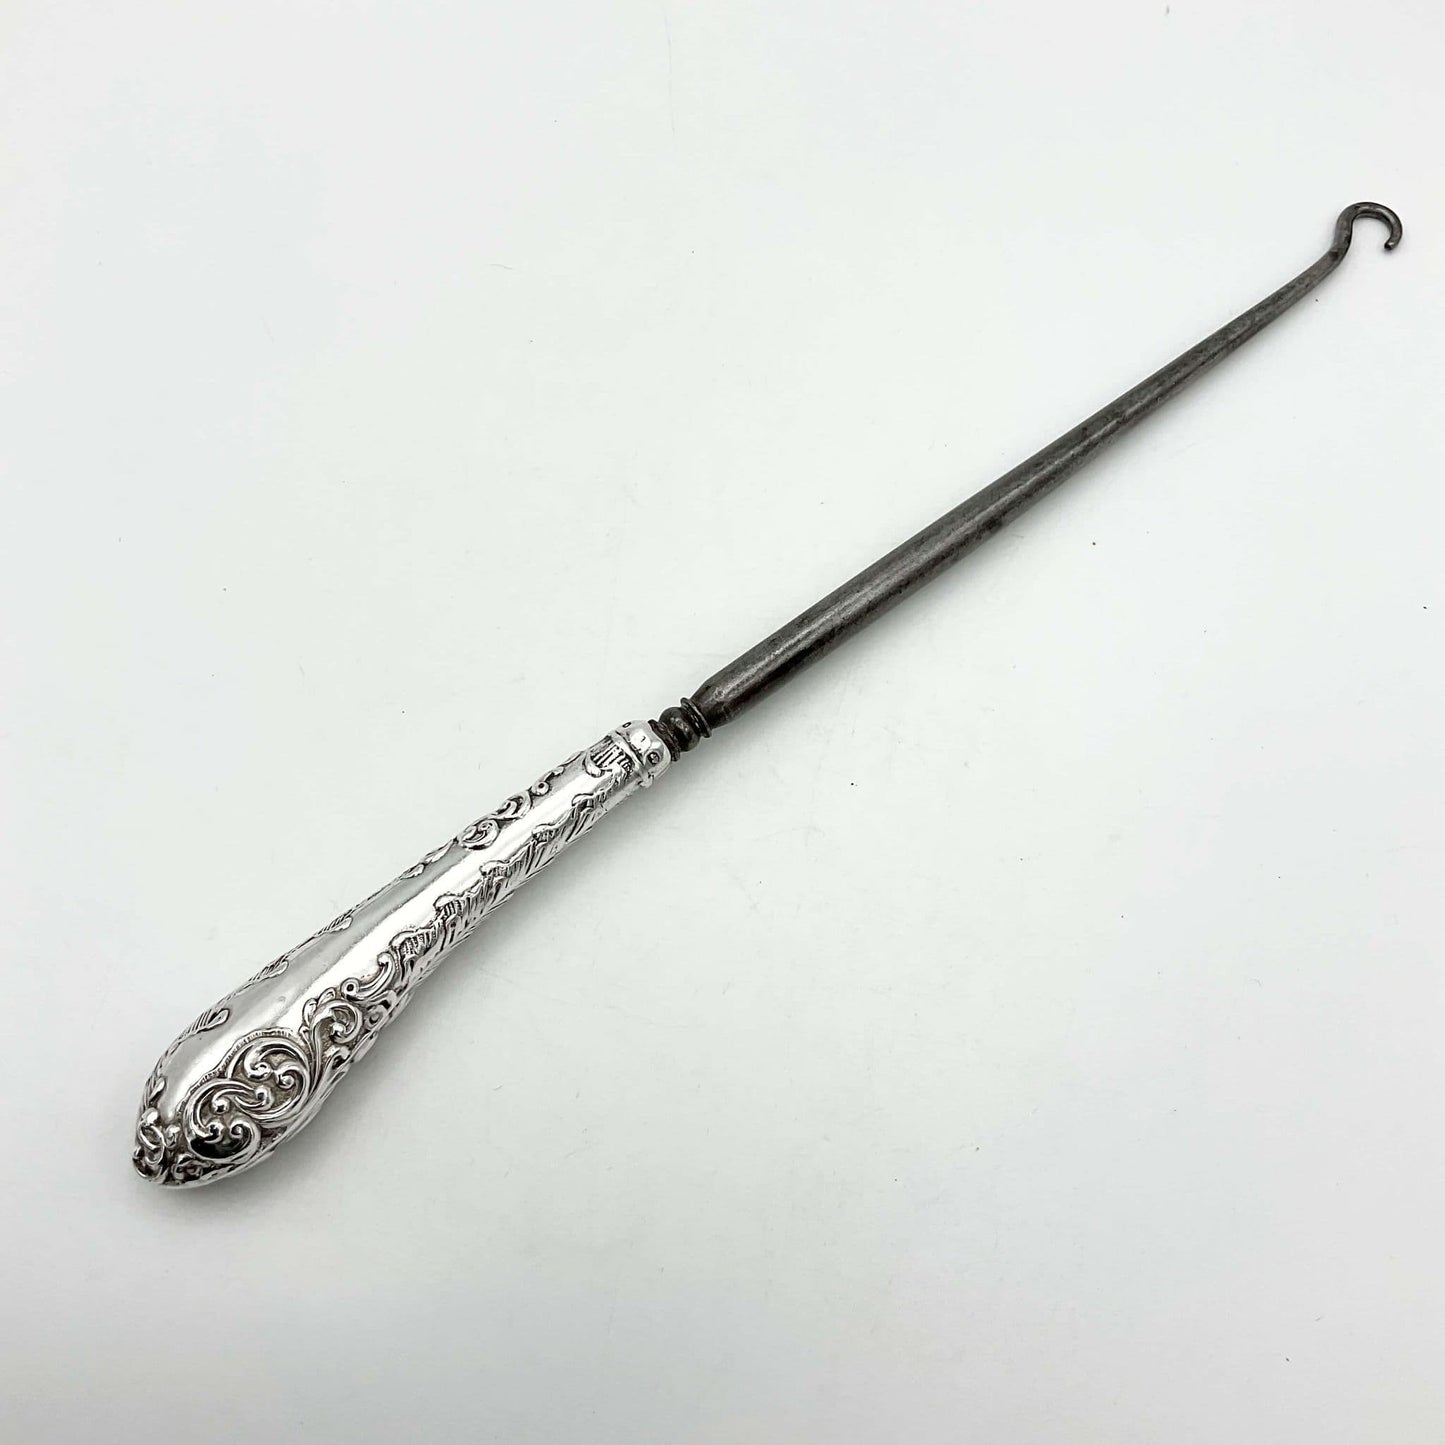 Silver handled antique button hook on a white background